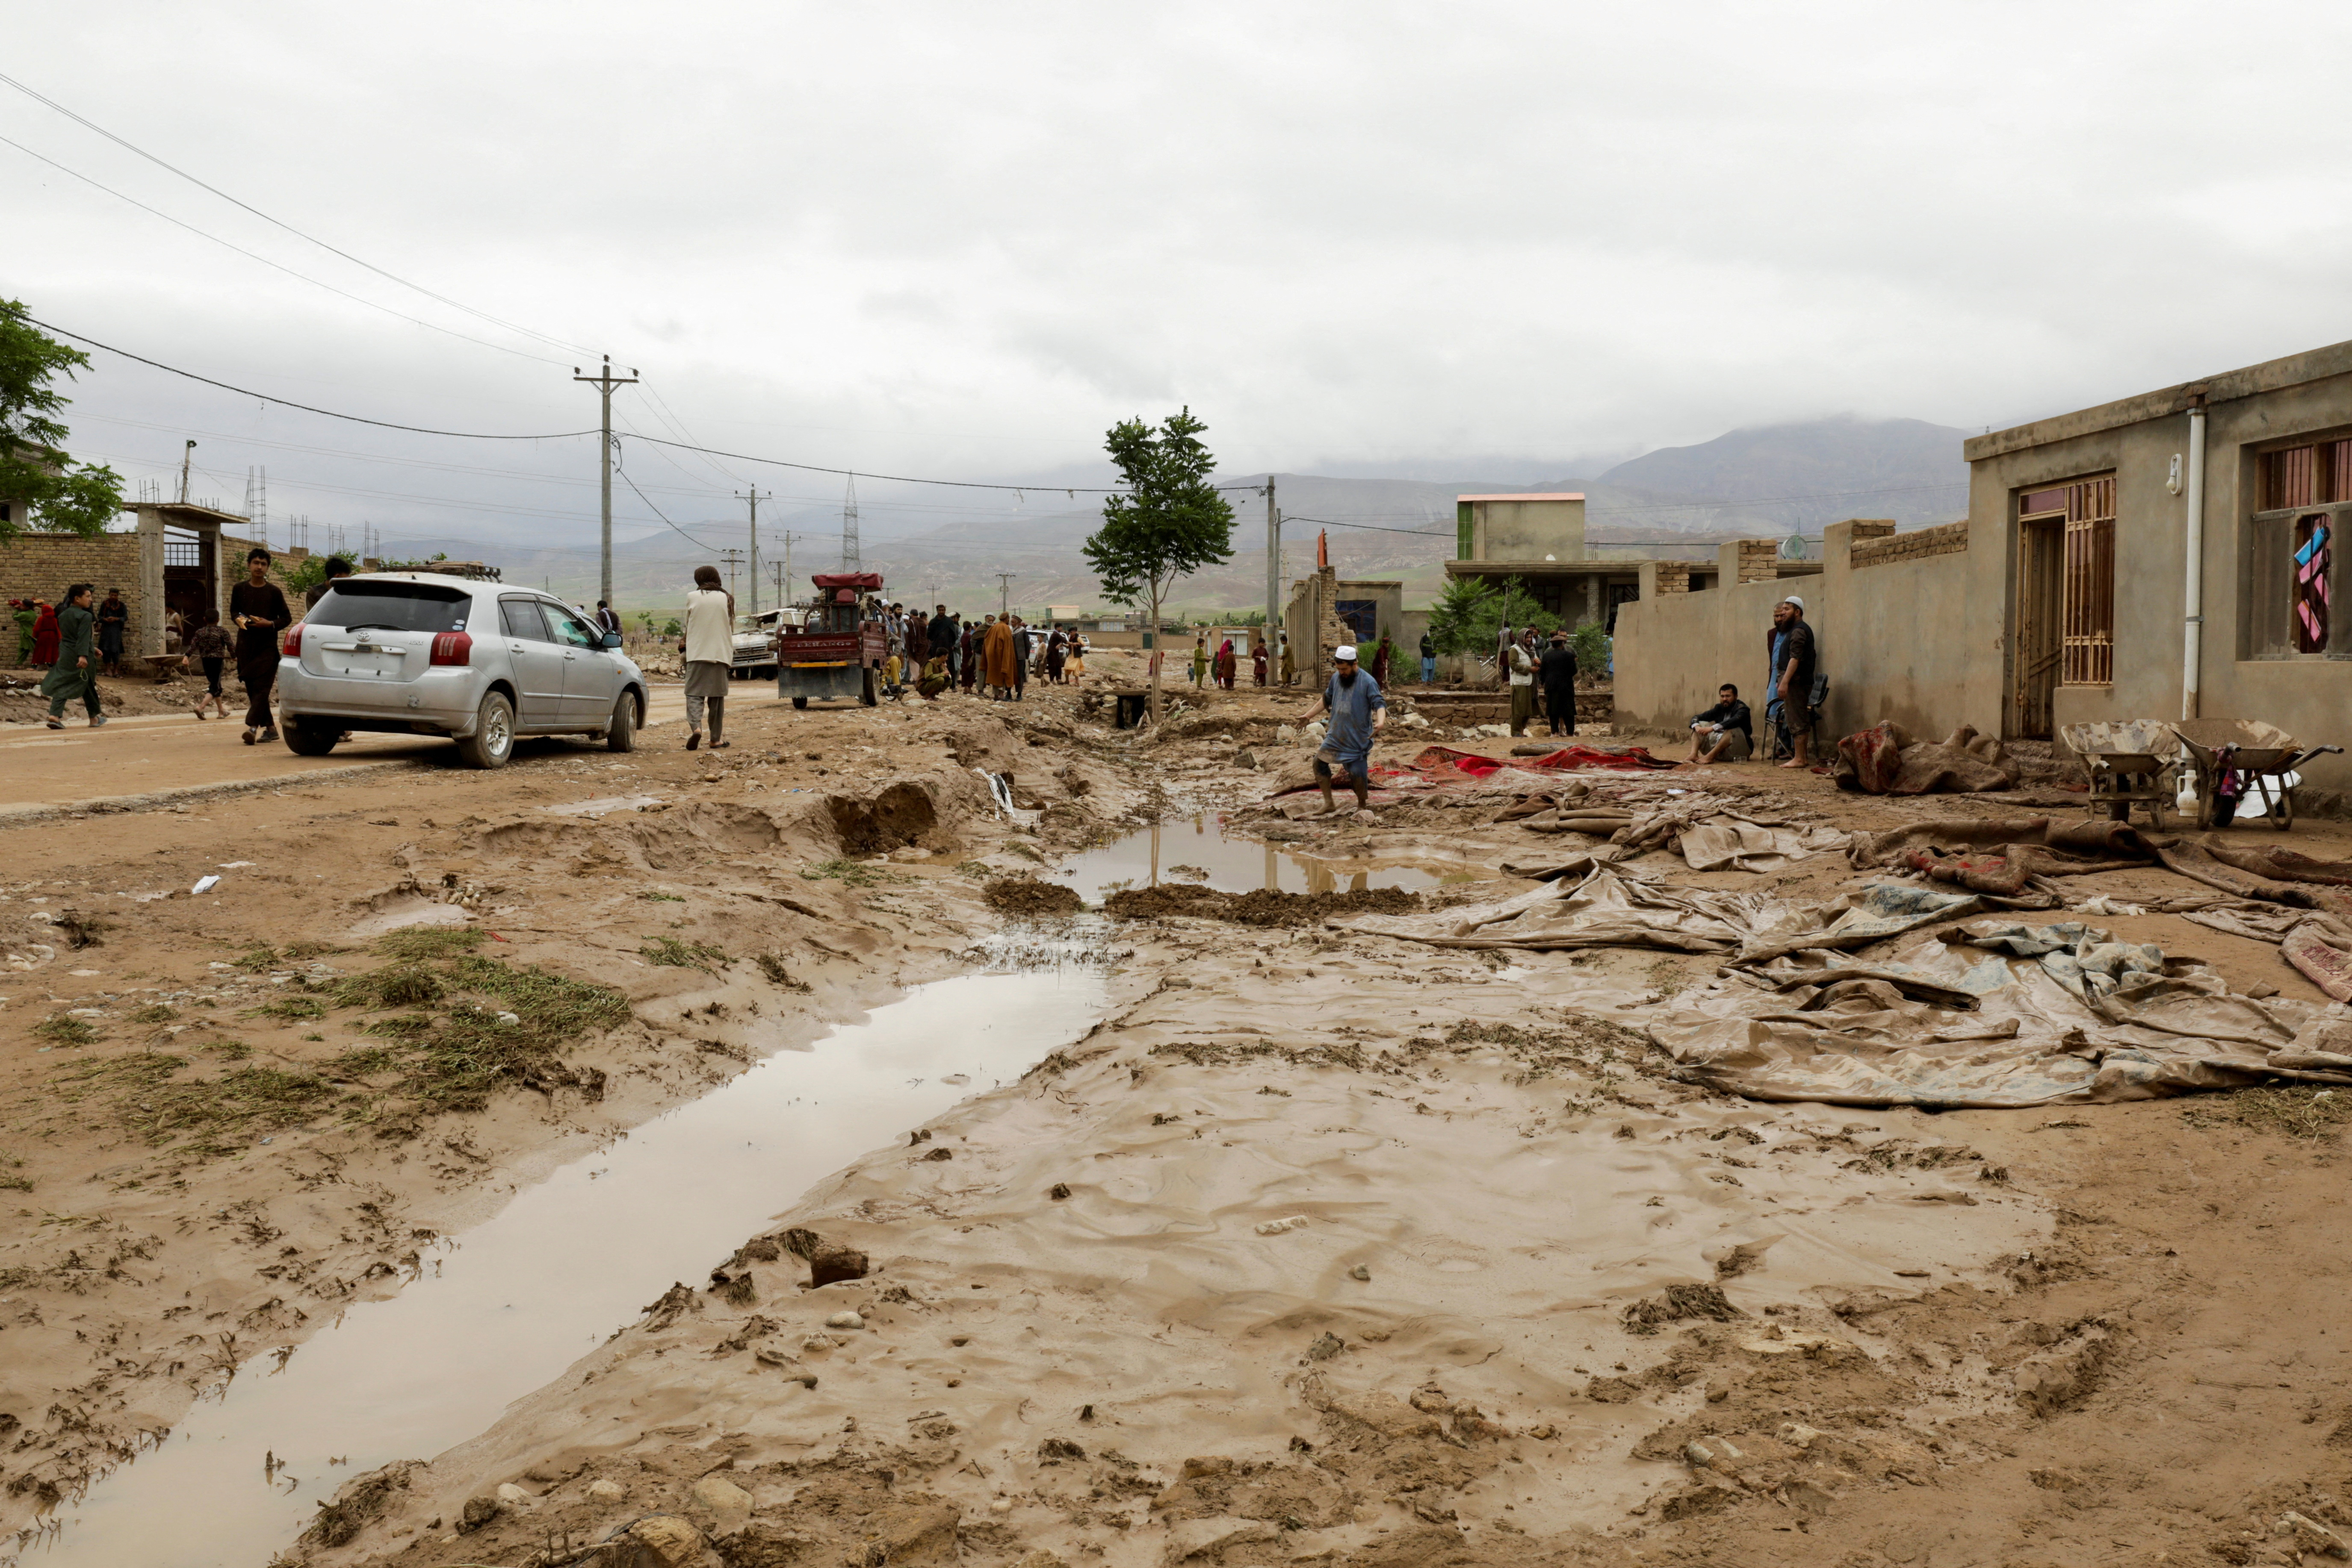 Aftermath of floods following heavy rain in the northern province of Baghlan